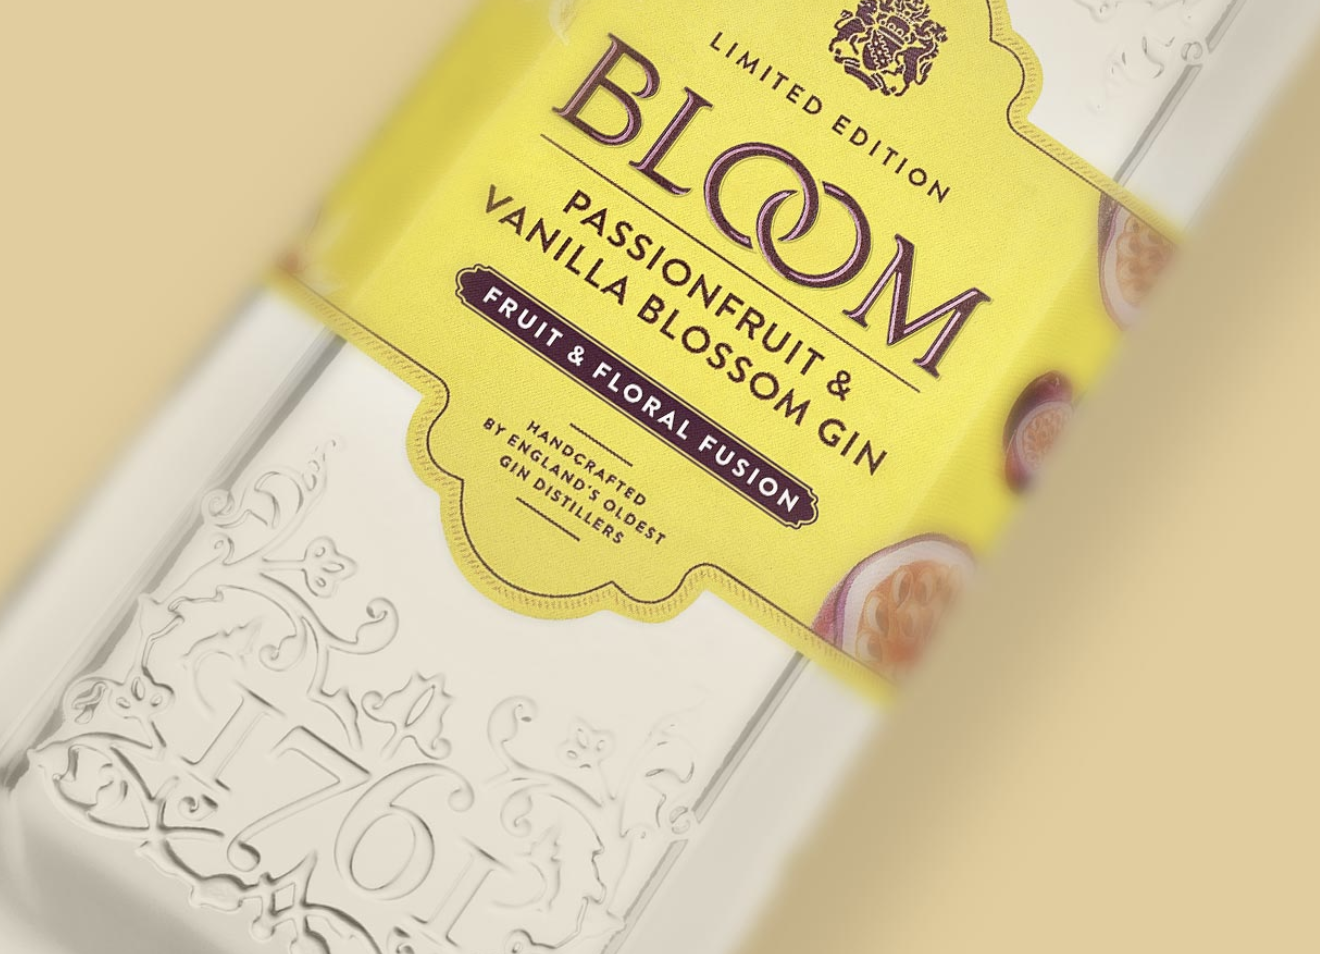 You can now get passionfruit and vanilla flavoured BLOOM gin, The Manc